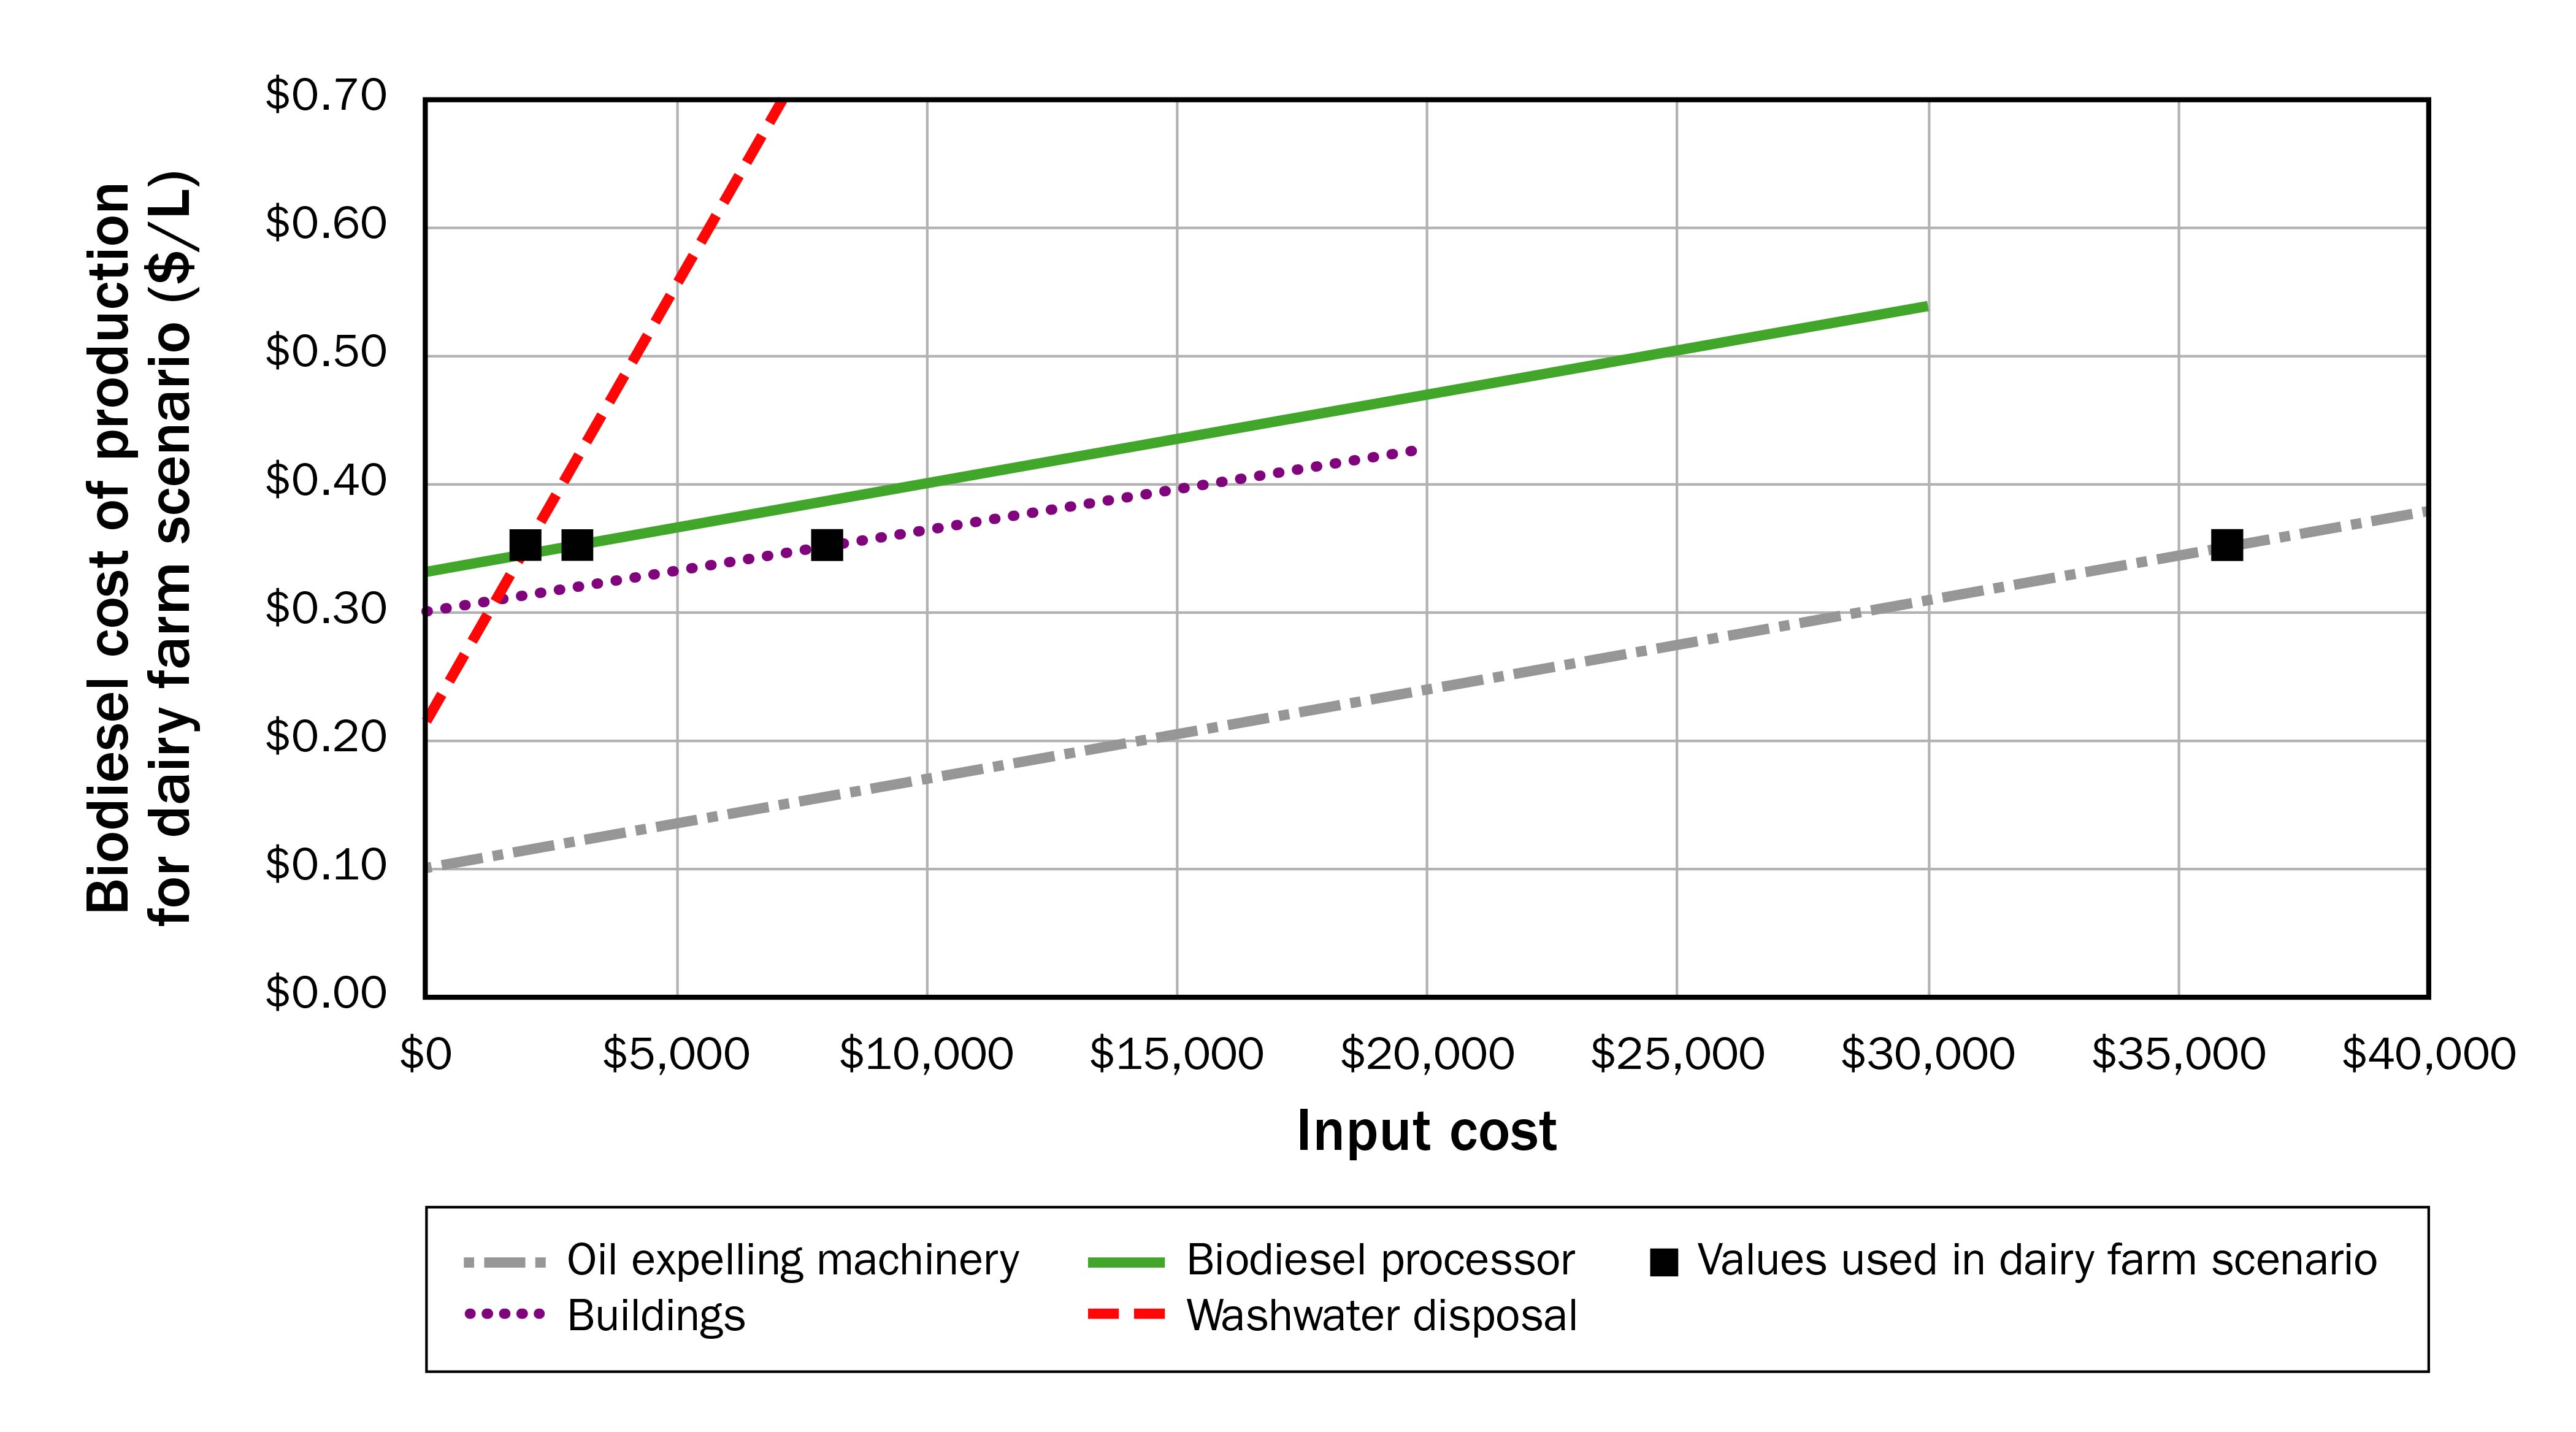 A straight-line graph showing the sensitivity of select biodiesel production input costs, using the dairy farm example as the basis. The graph shows wastewater disposal to be the most sensitive input, while building, machinery and equipment costs have a smaller effect on biodiesel production costs as they increase from $3,000 to $40,000.